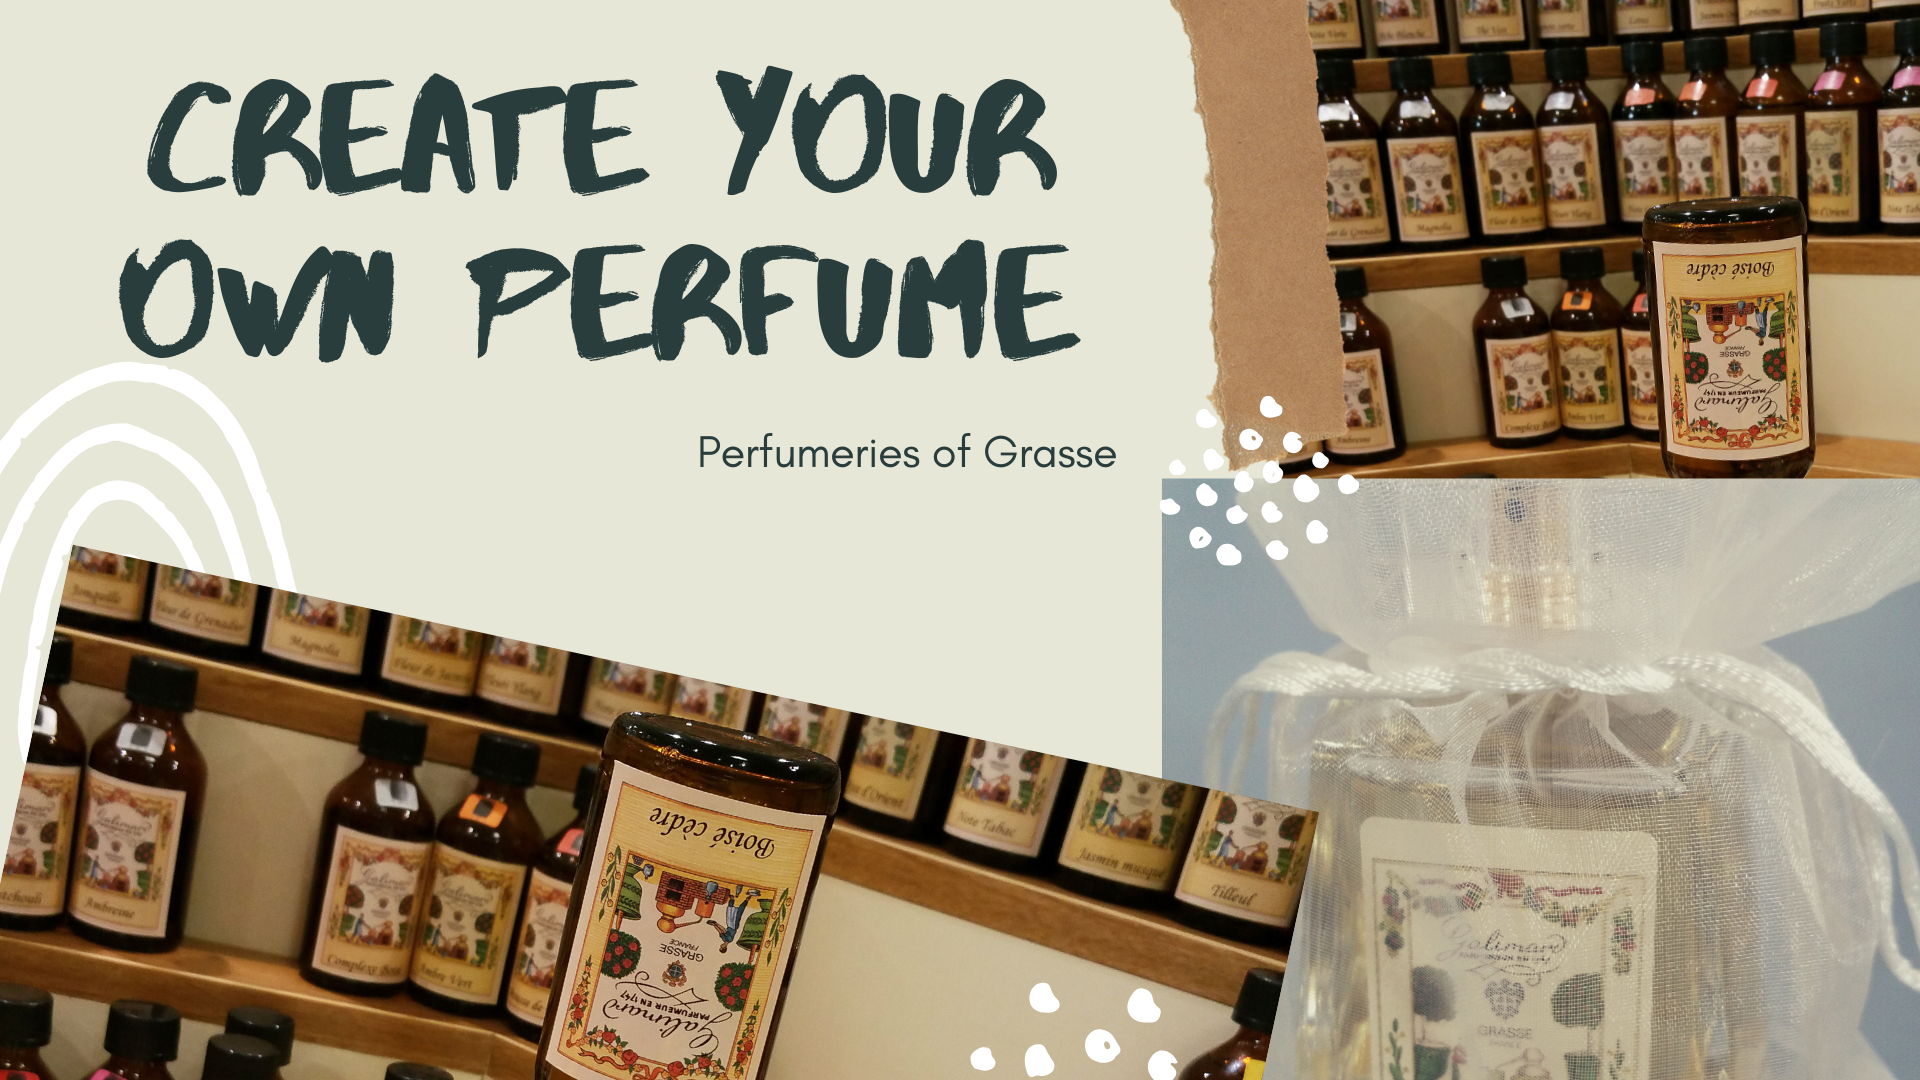 Create your own perfume